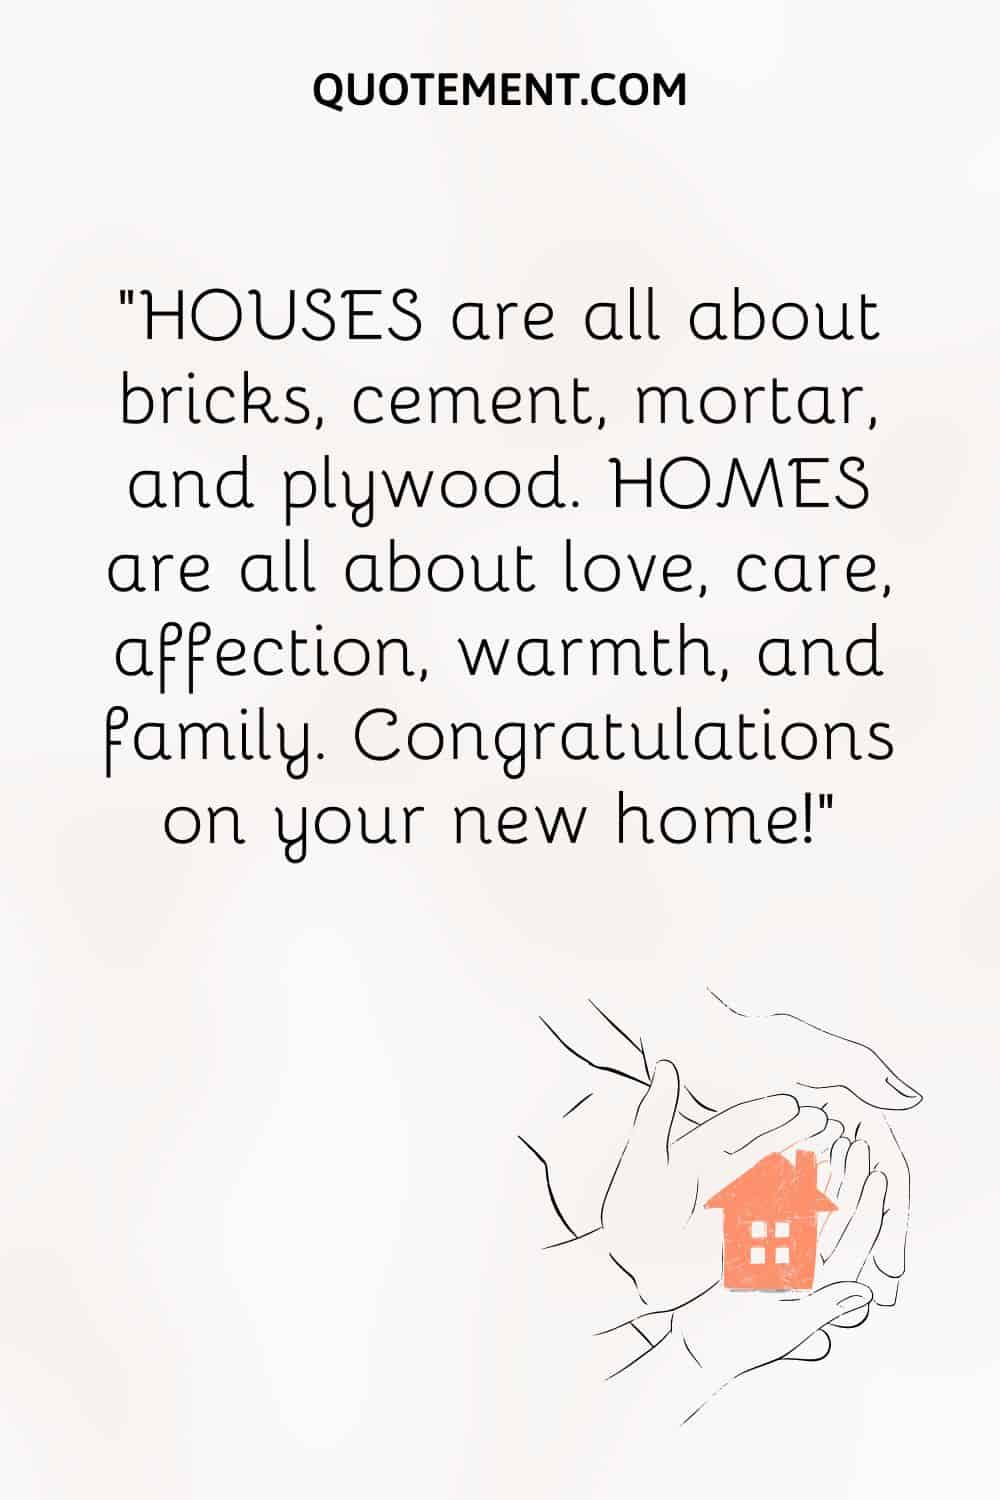  HOMES are all about love, care, affection, warmth, and family